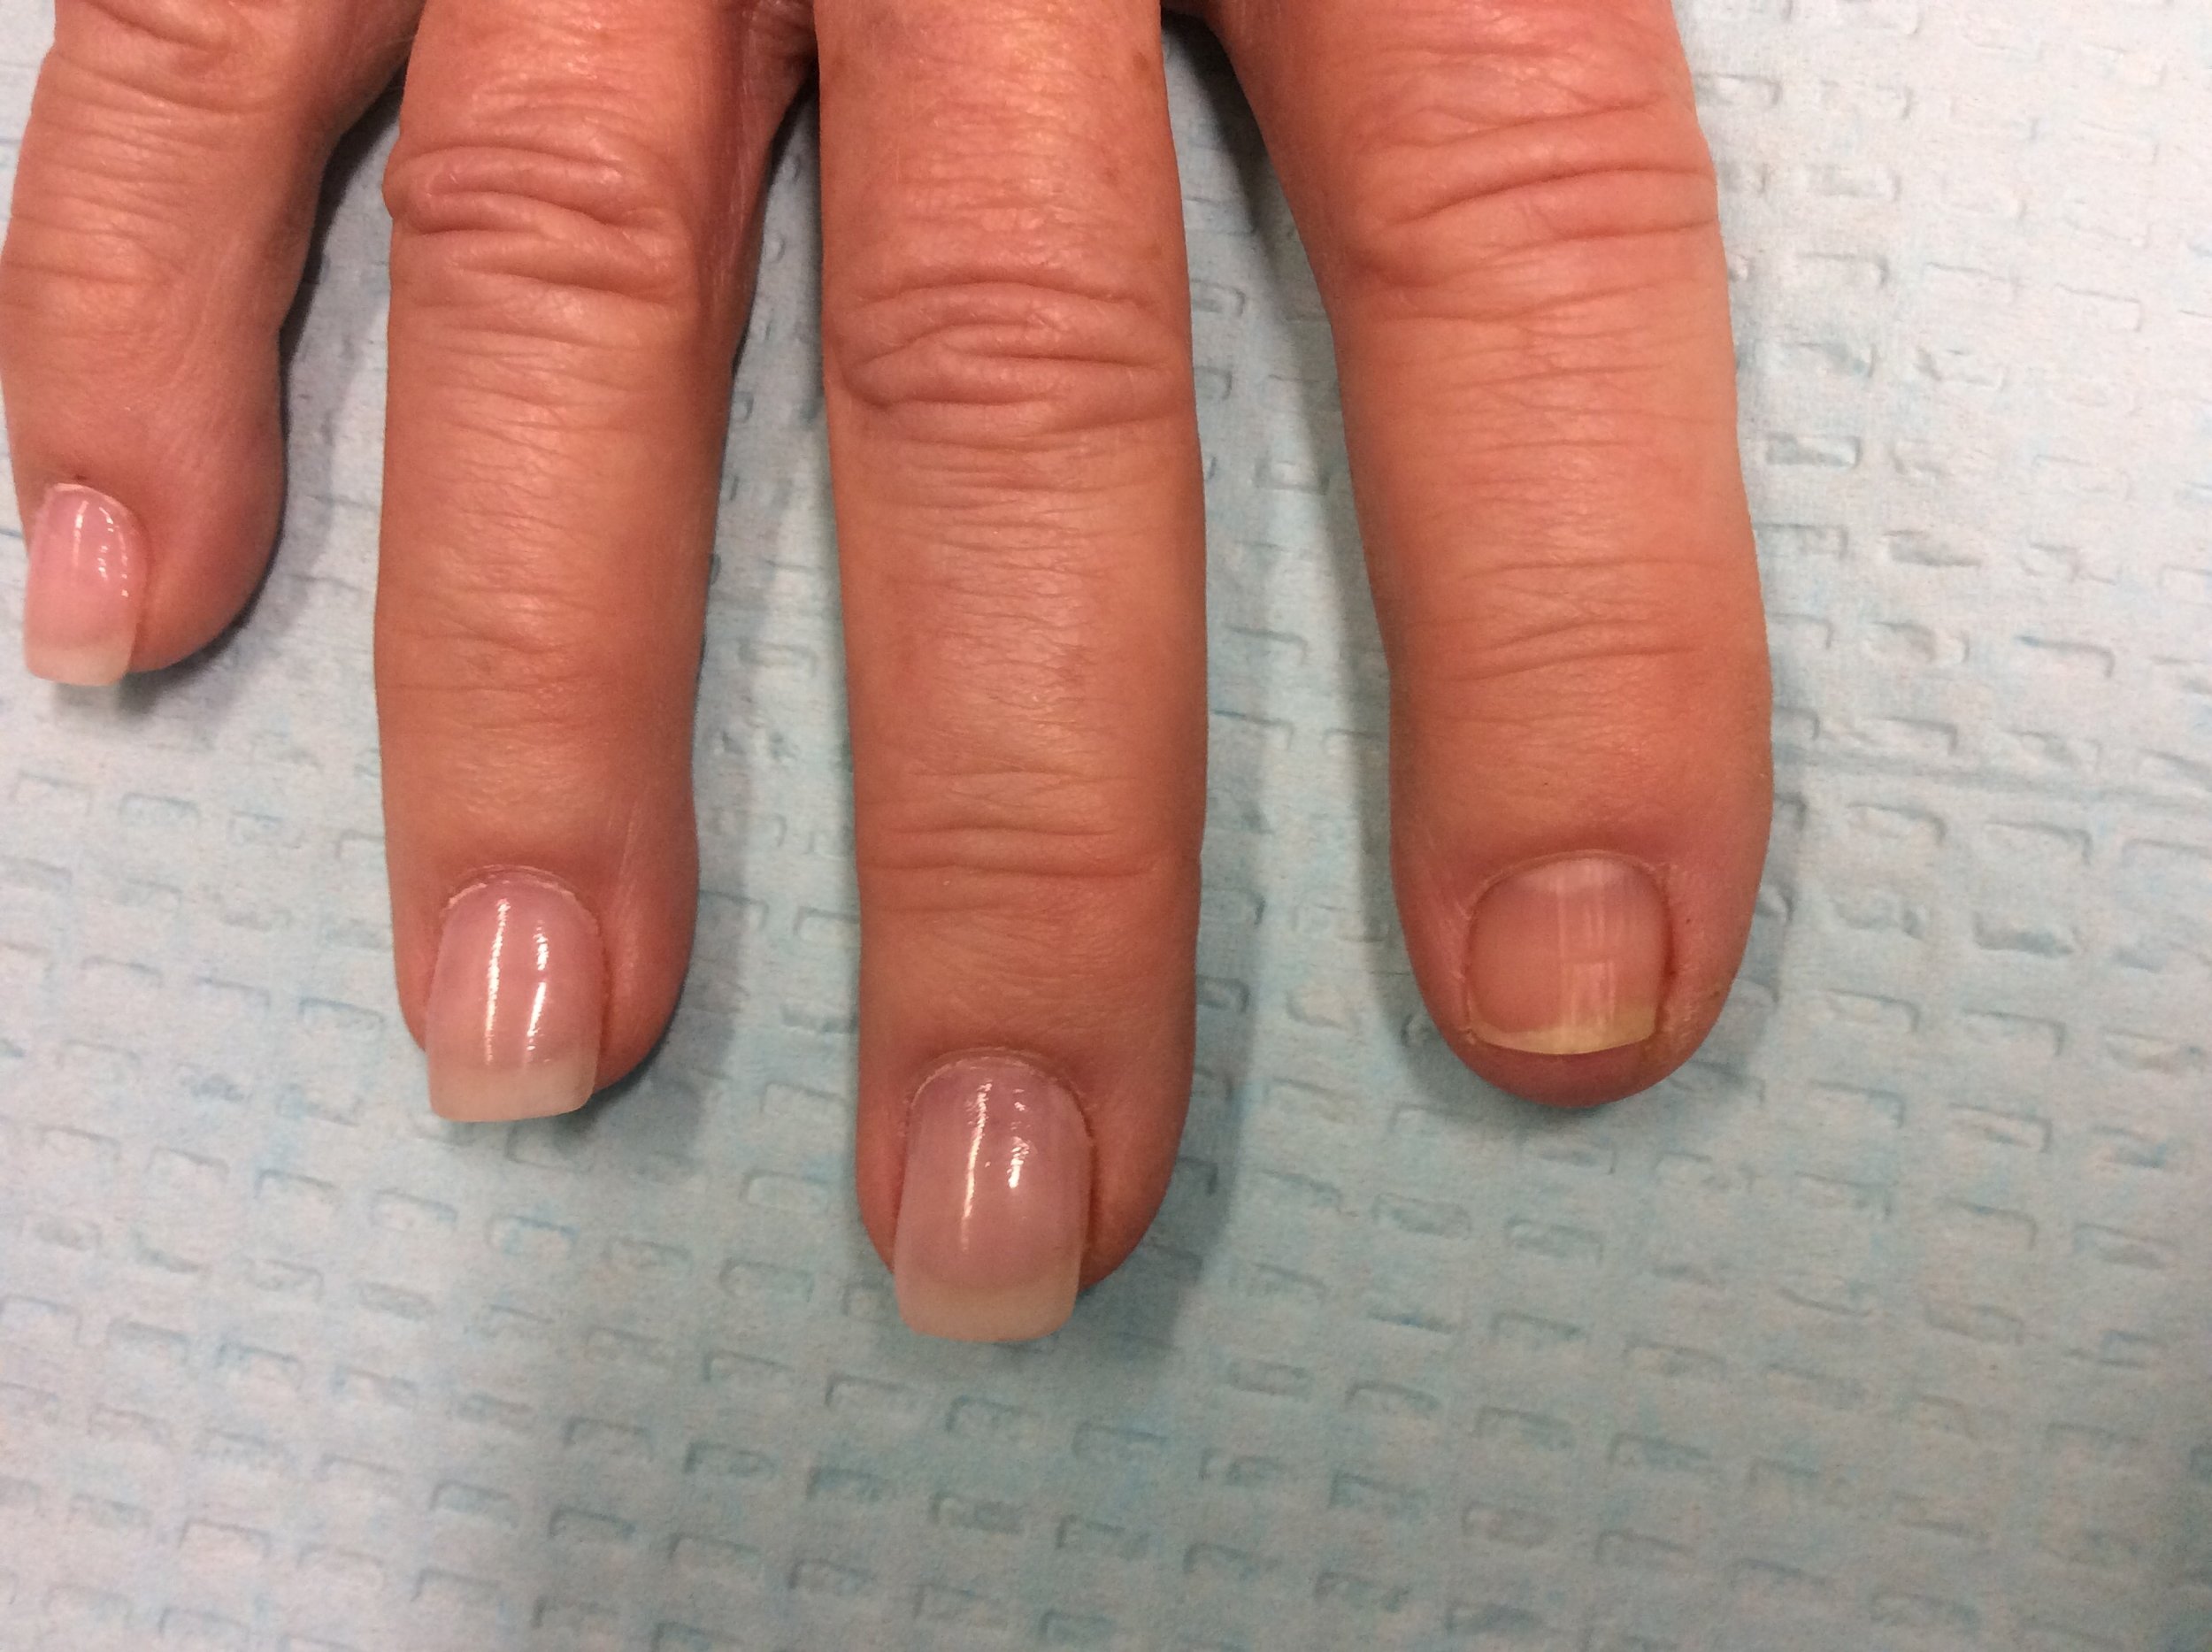 Signs of Multiple Sclerosis on Fingernails: Changes To Look For | MyMSTeam